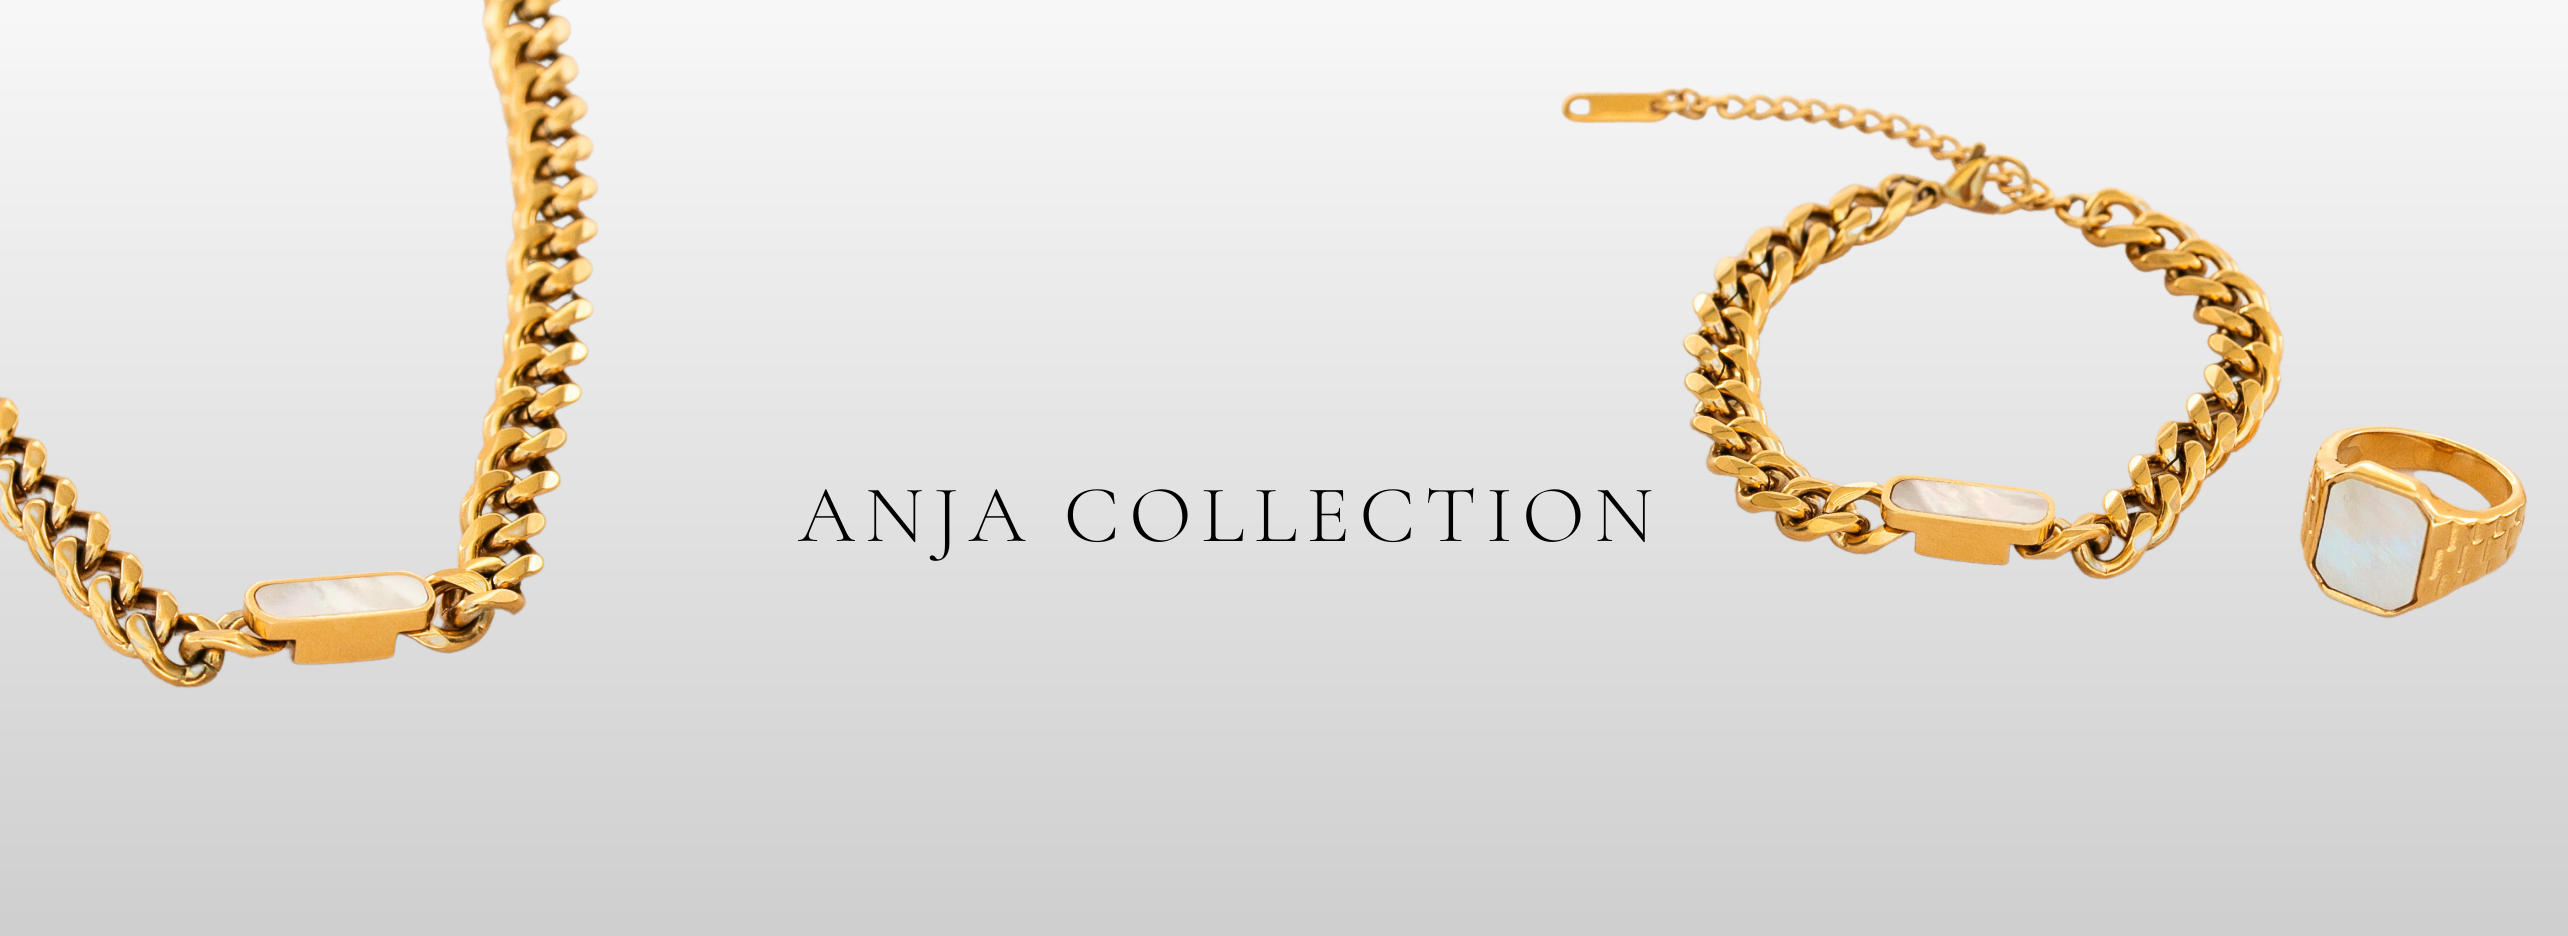 Anja Collection